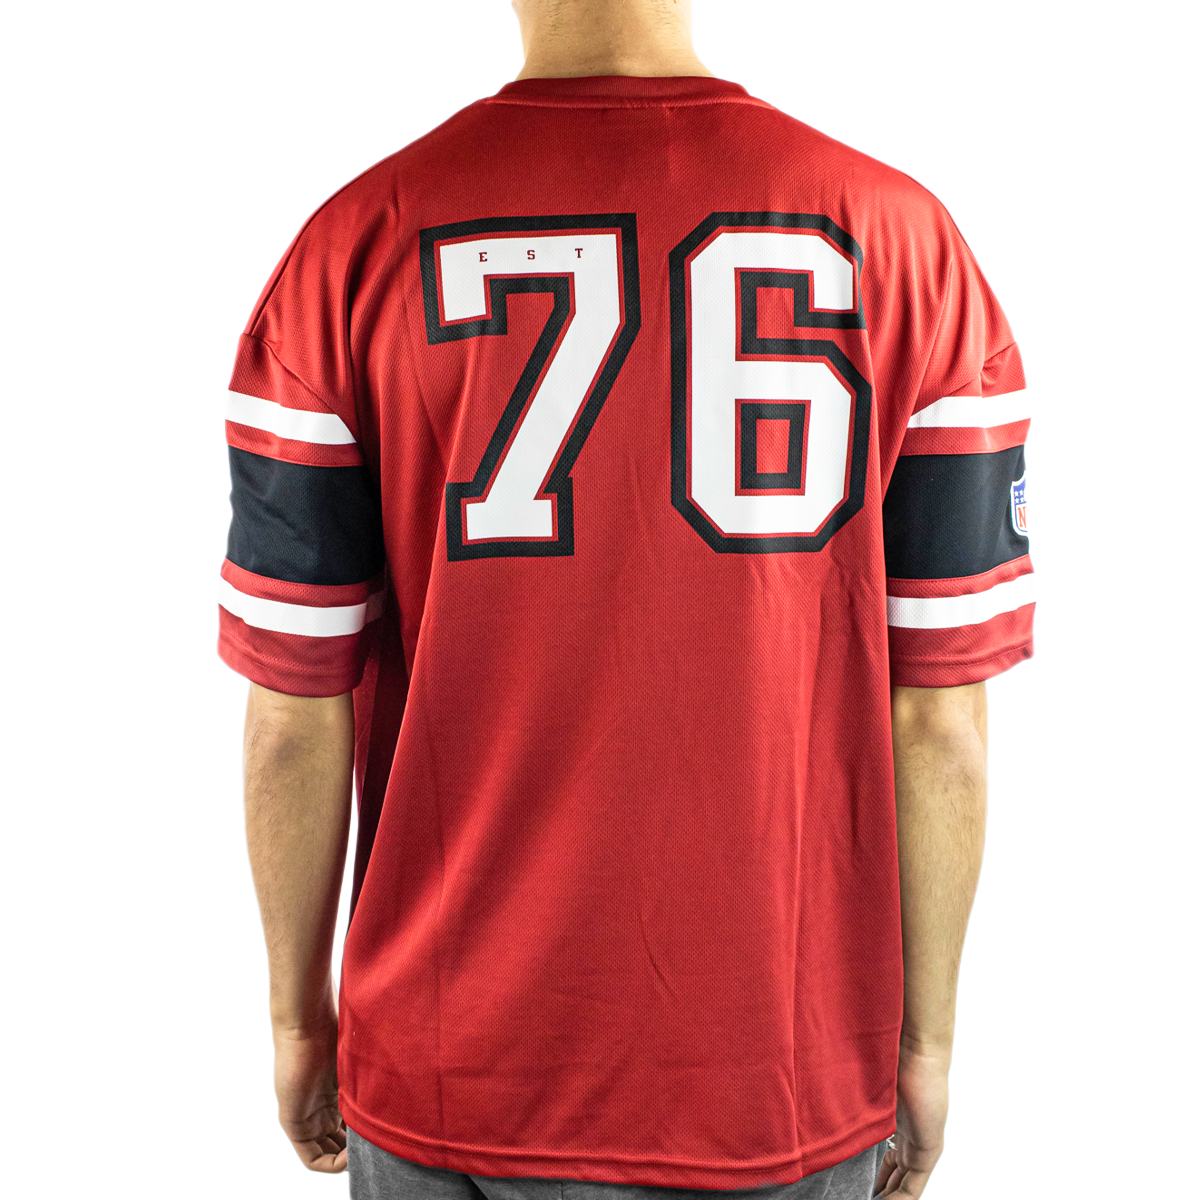 Fanatics Tampa Bay Buccaneers NFL Franchise Poly Mesh Supporters Jersey Trikot 6632M-RED-BUC-FHE-